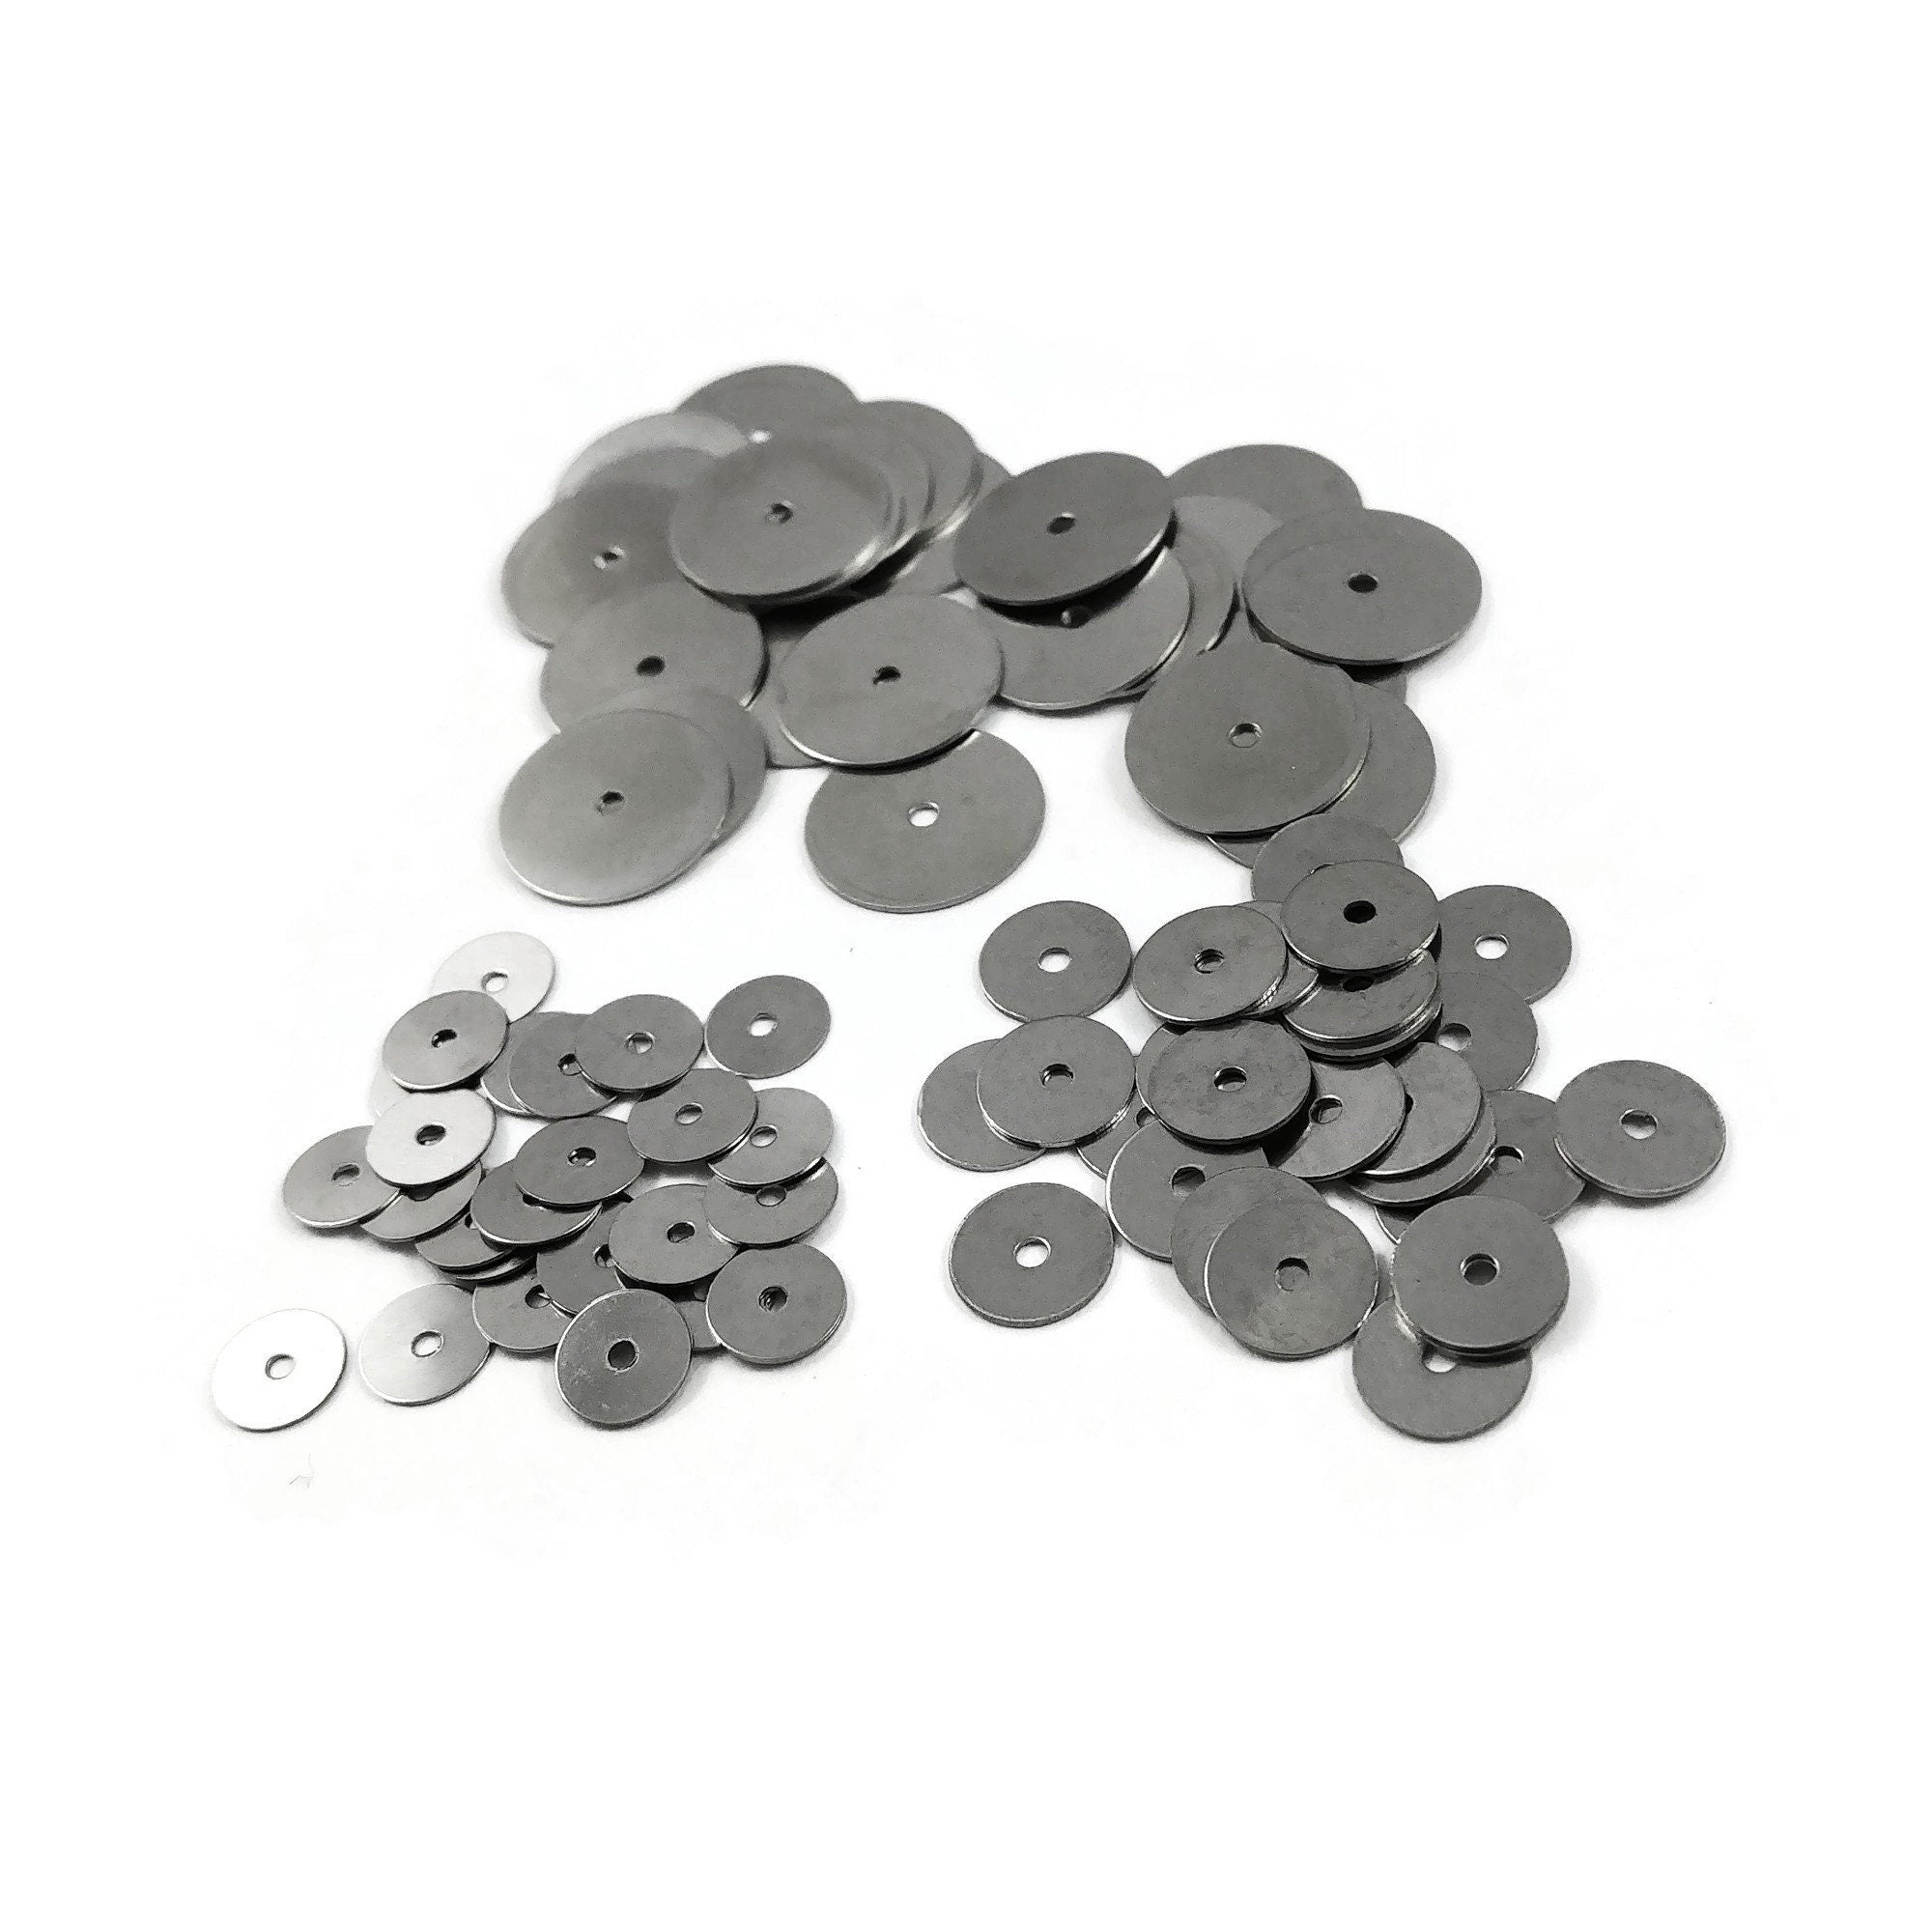 200 surgical stainless steel heishi beads, Flat metal spacer beads